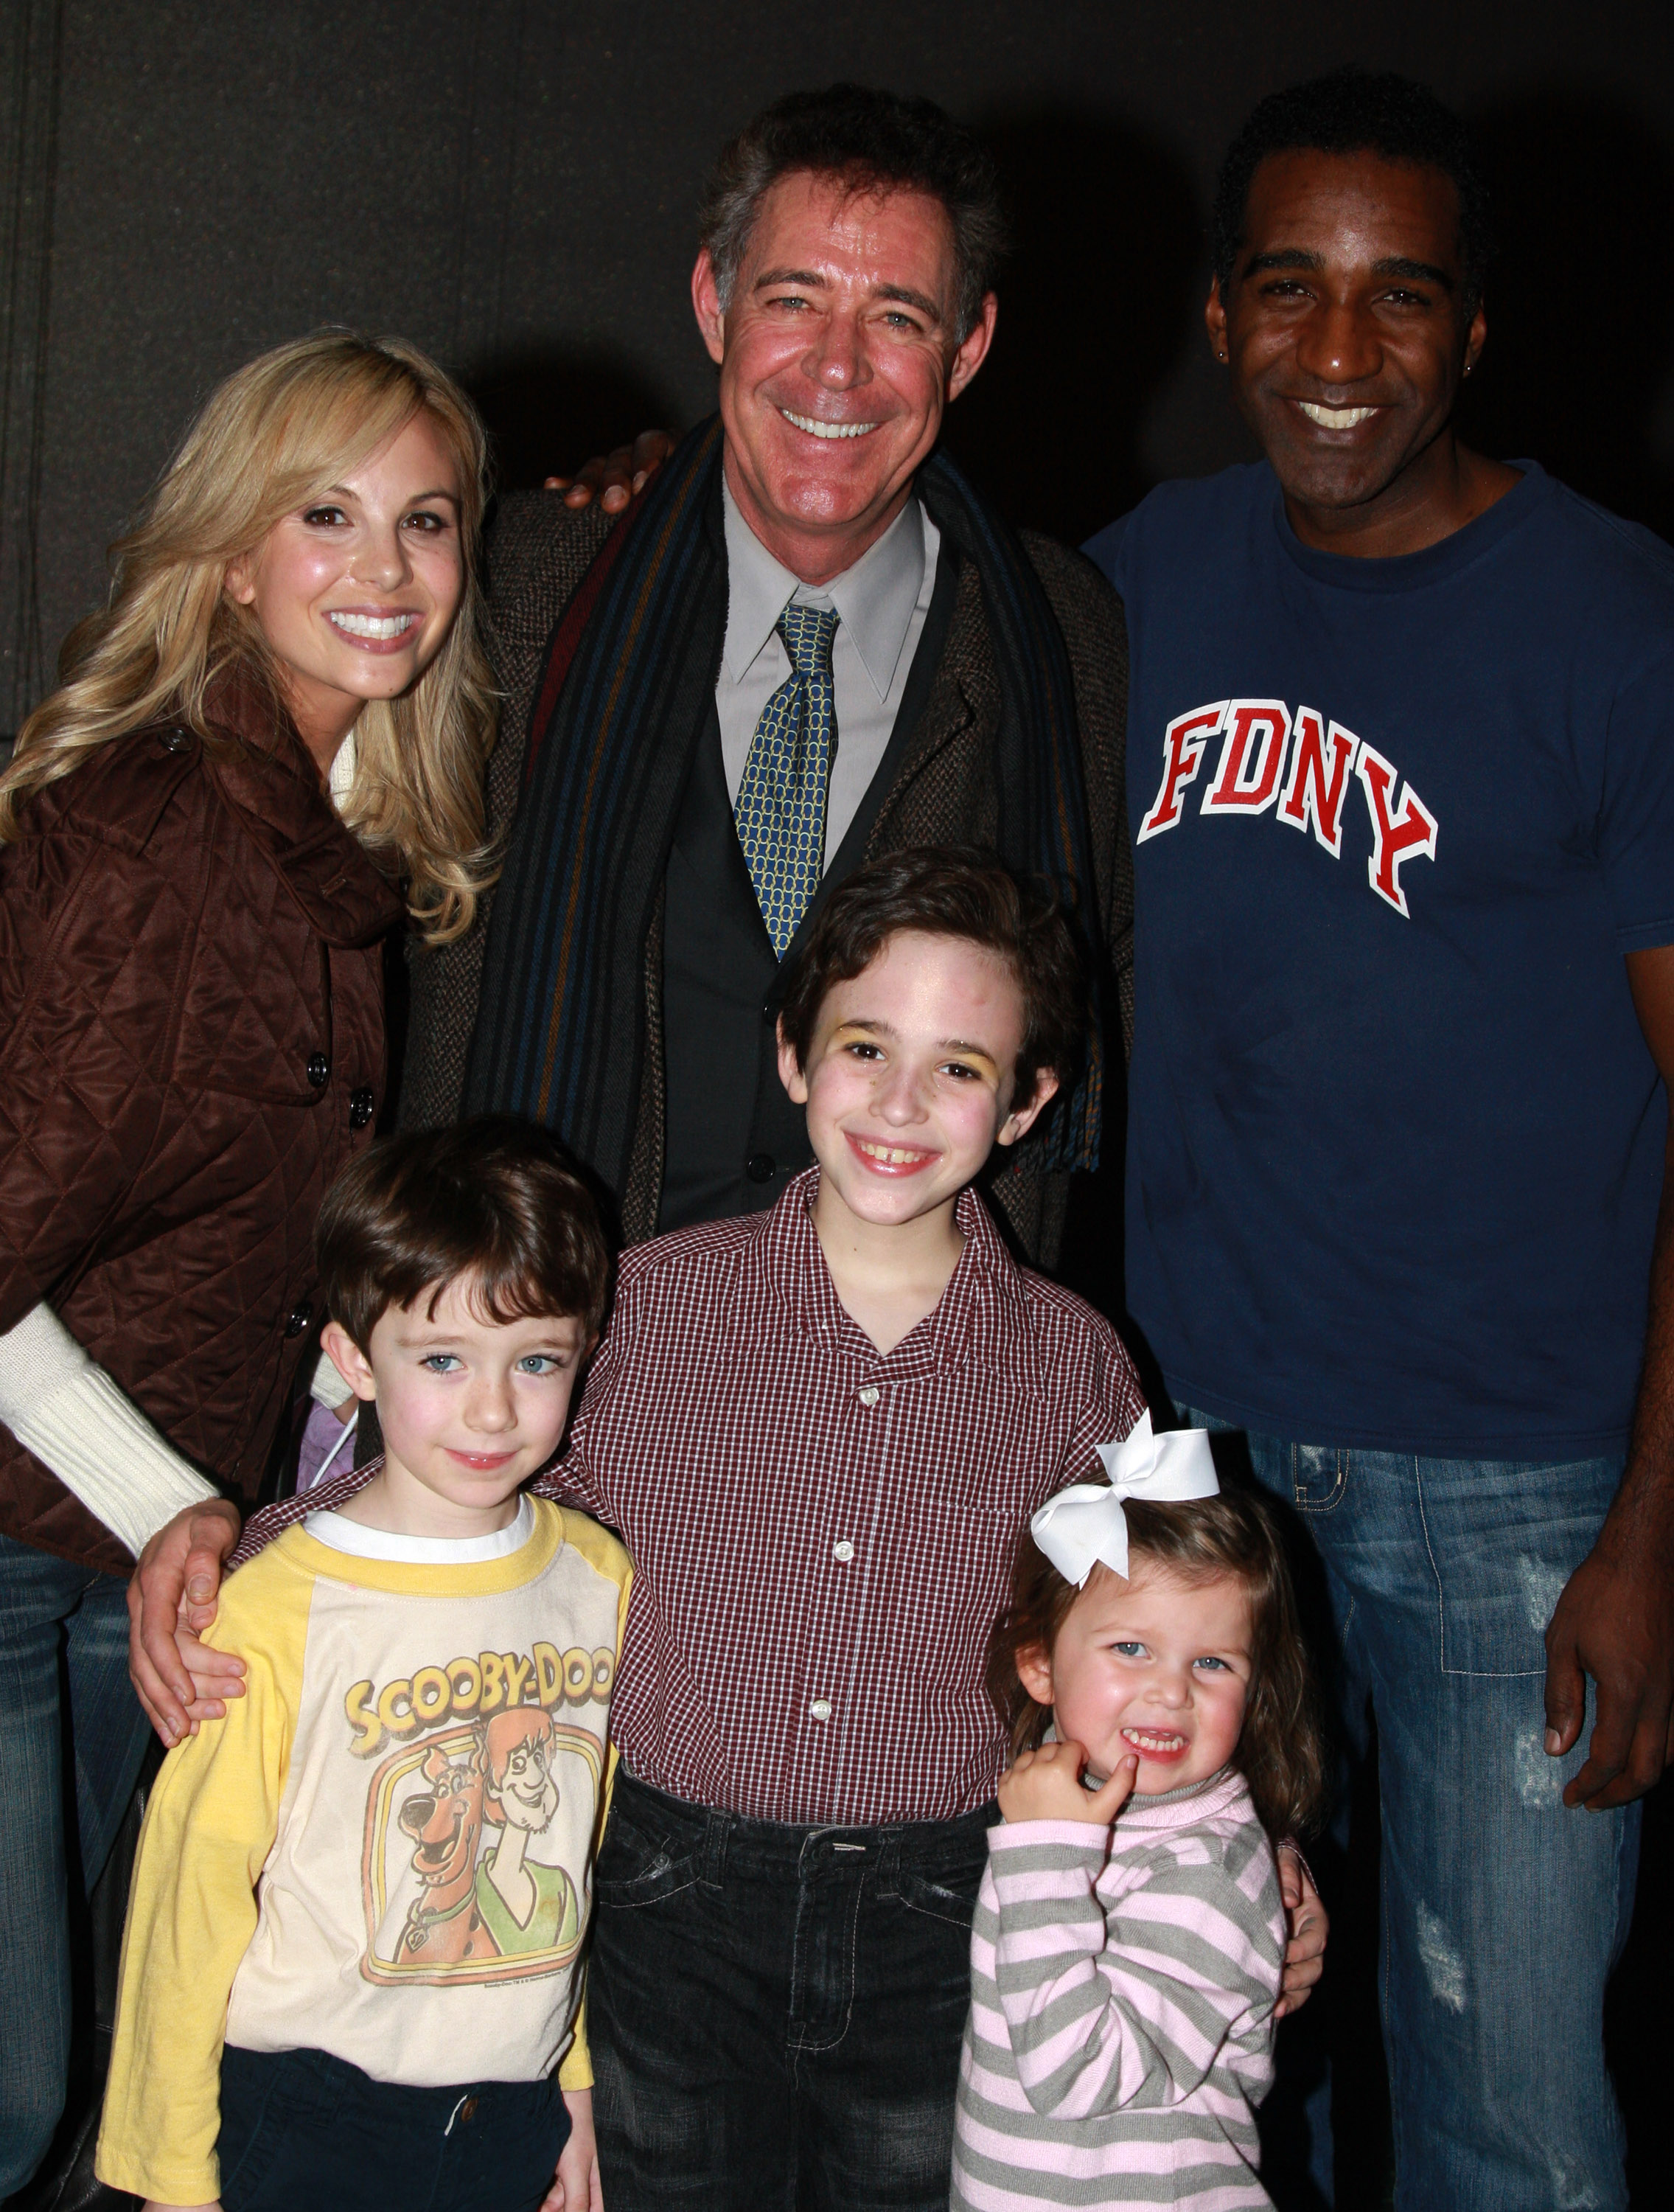 (L-R) Elizabeth Hasselback, Barry Williams, Norm Lewis, Trevor Braun,  Brandon Eric Williams, and Grace Hasselback pose as they visit backstage at "The Little Mermaid" on Broadway at The Lunt Fontanne Theater on January 16, 2008, in New York City. | Source: Getty Images